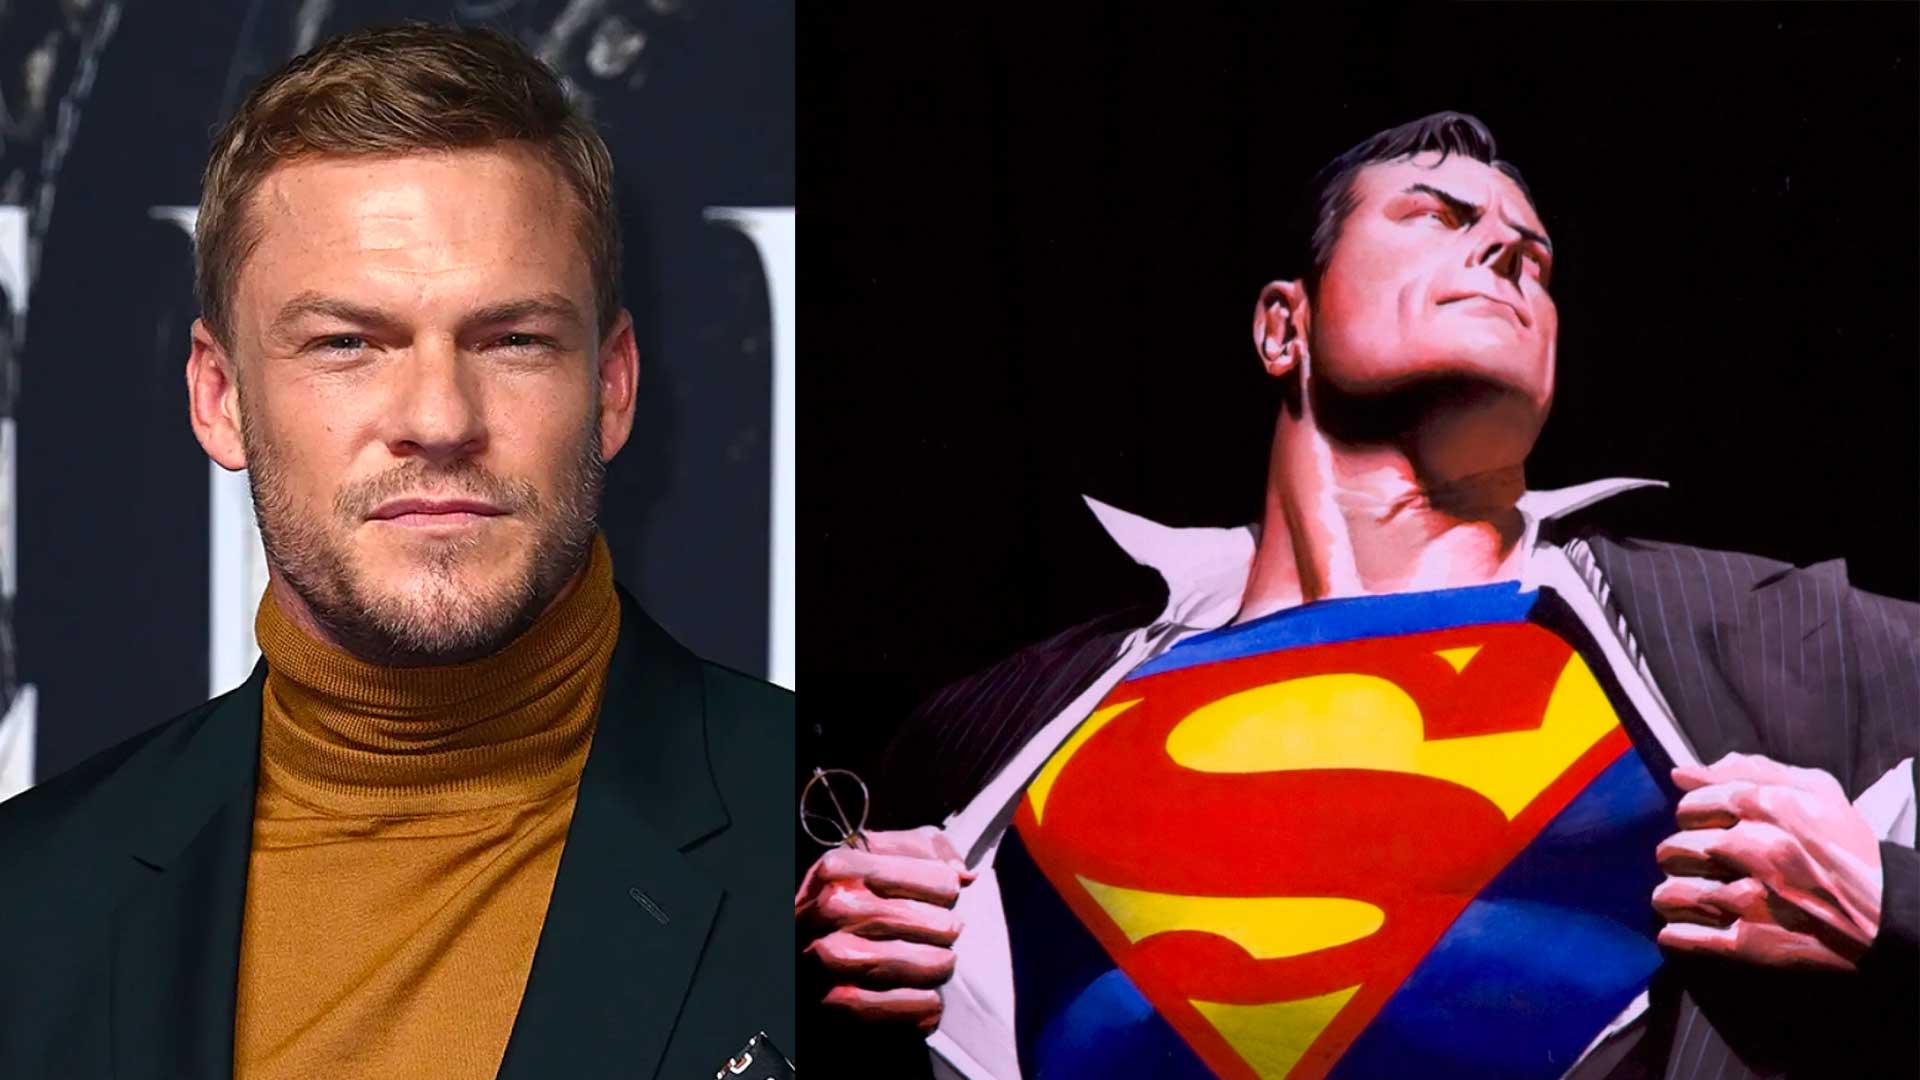 Who is replacing Henry Cavill as Superman?